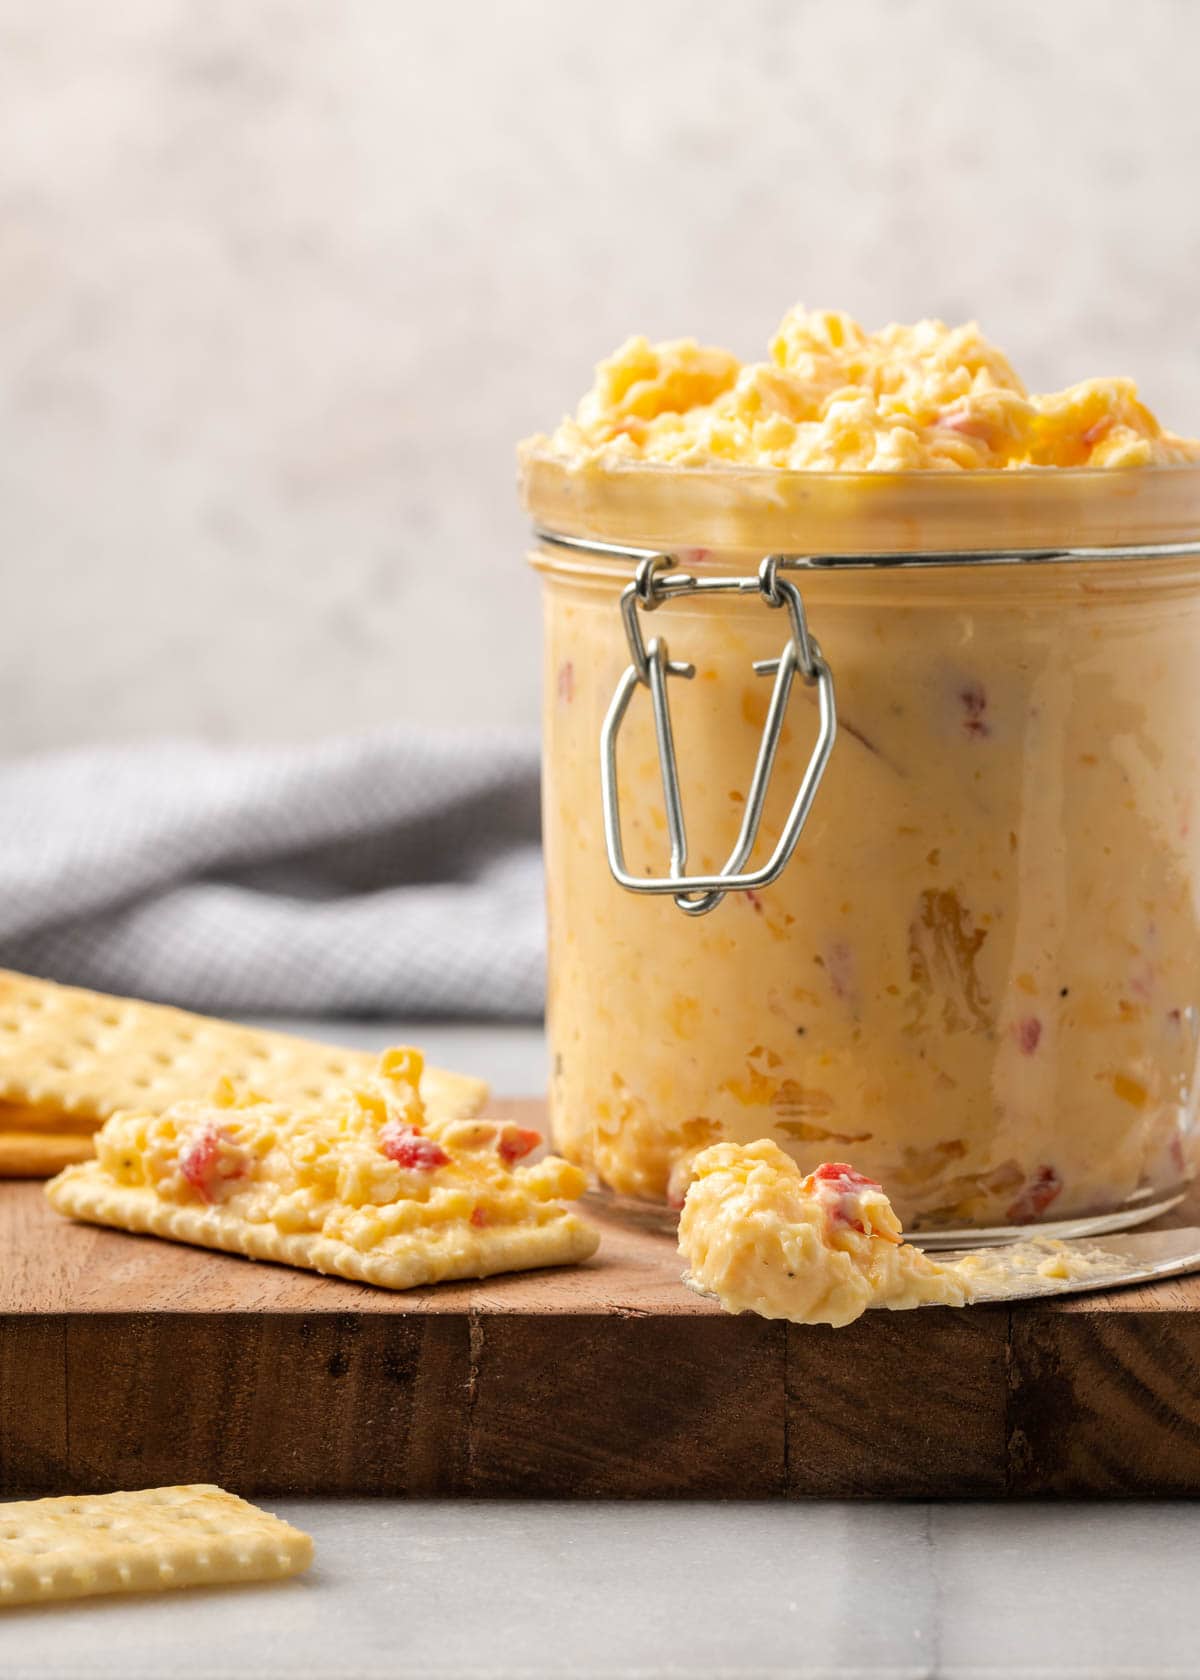 Pimento Cheese and crackers on a wooden cutting board.